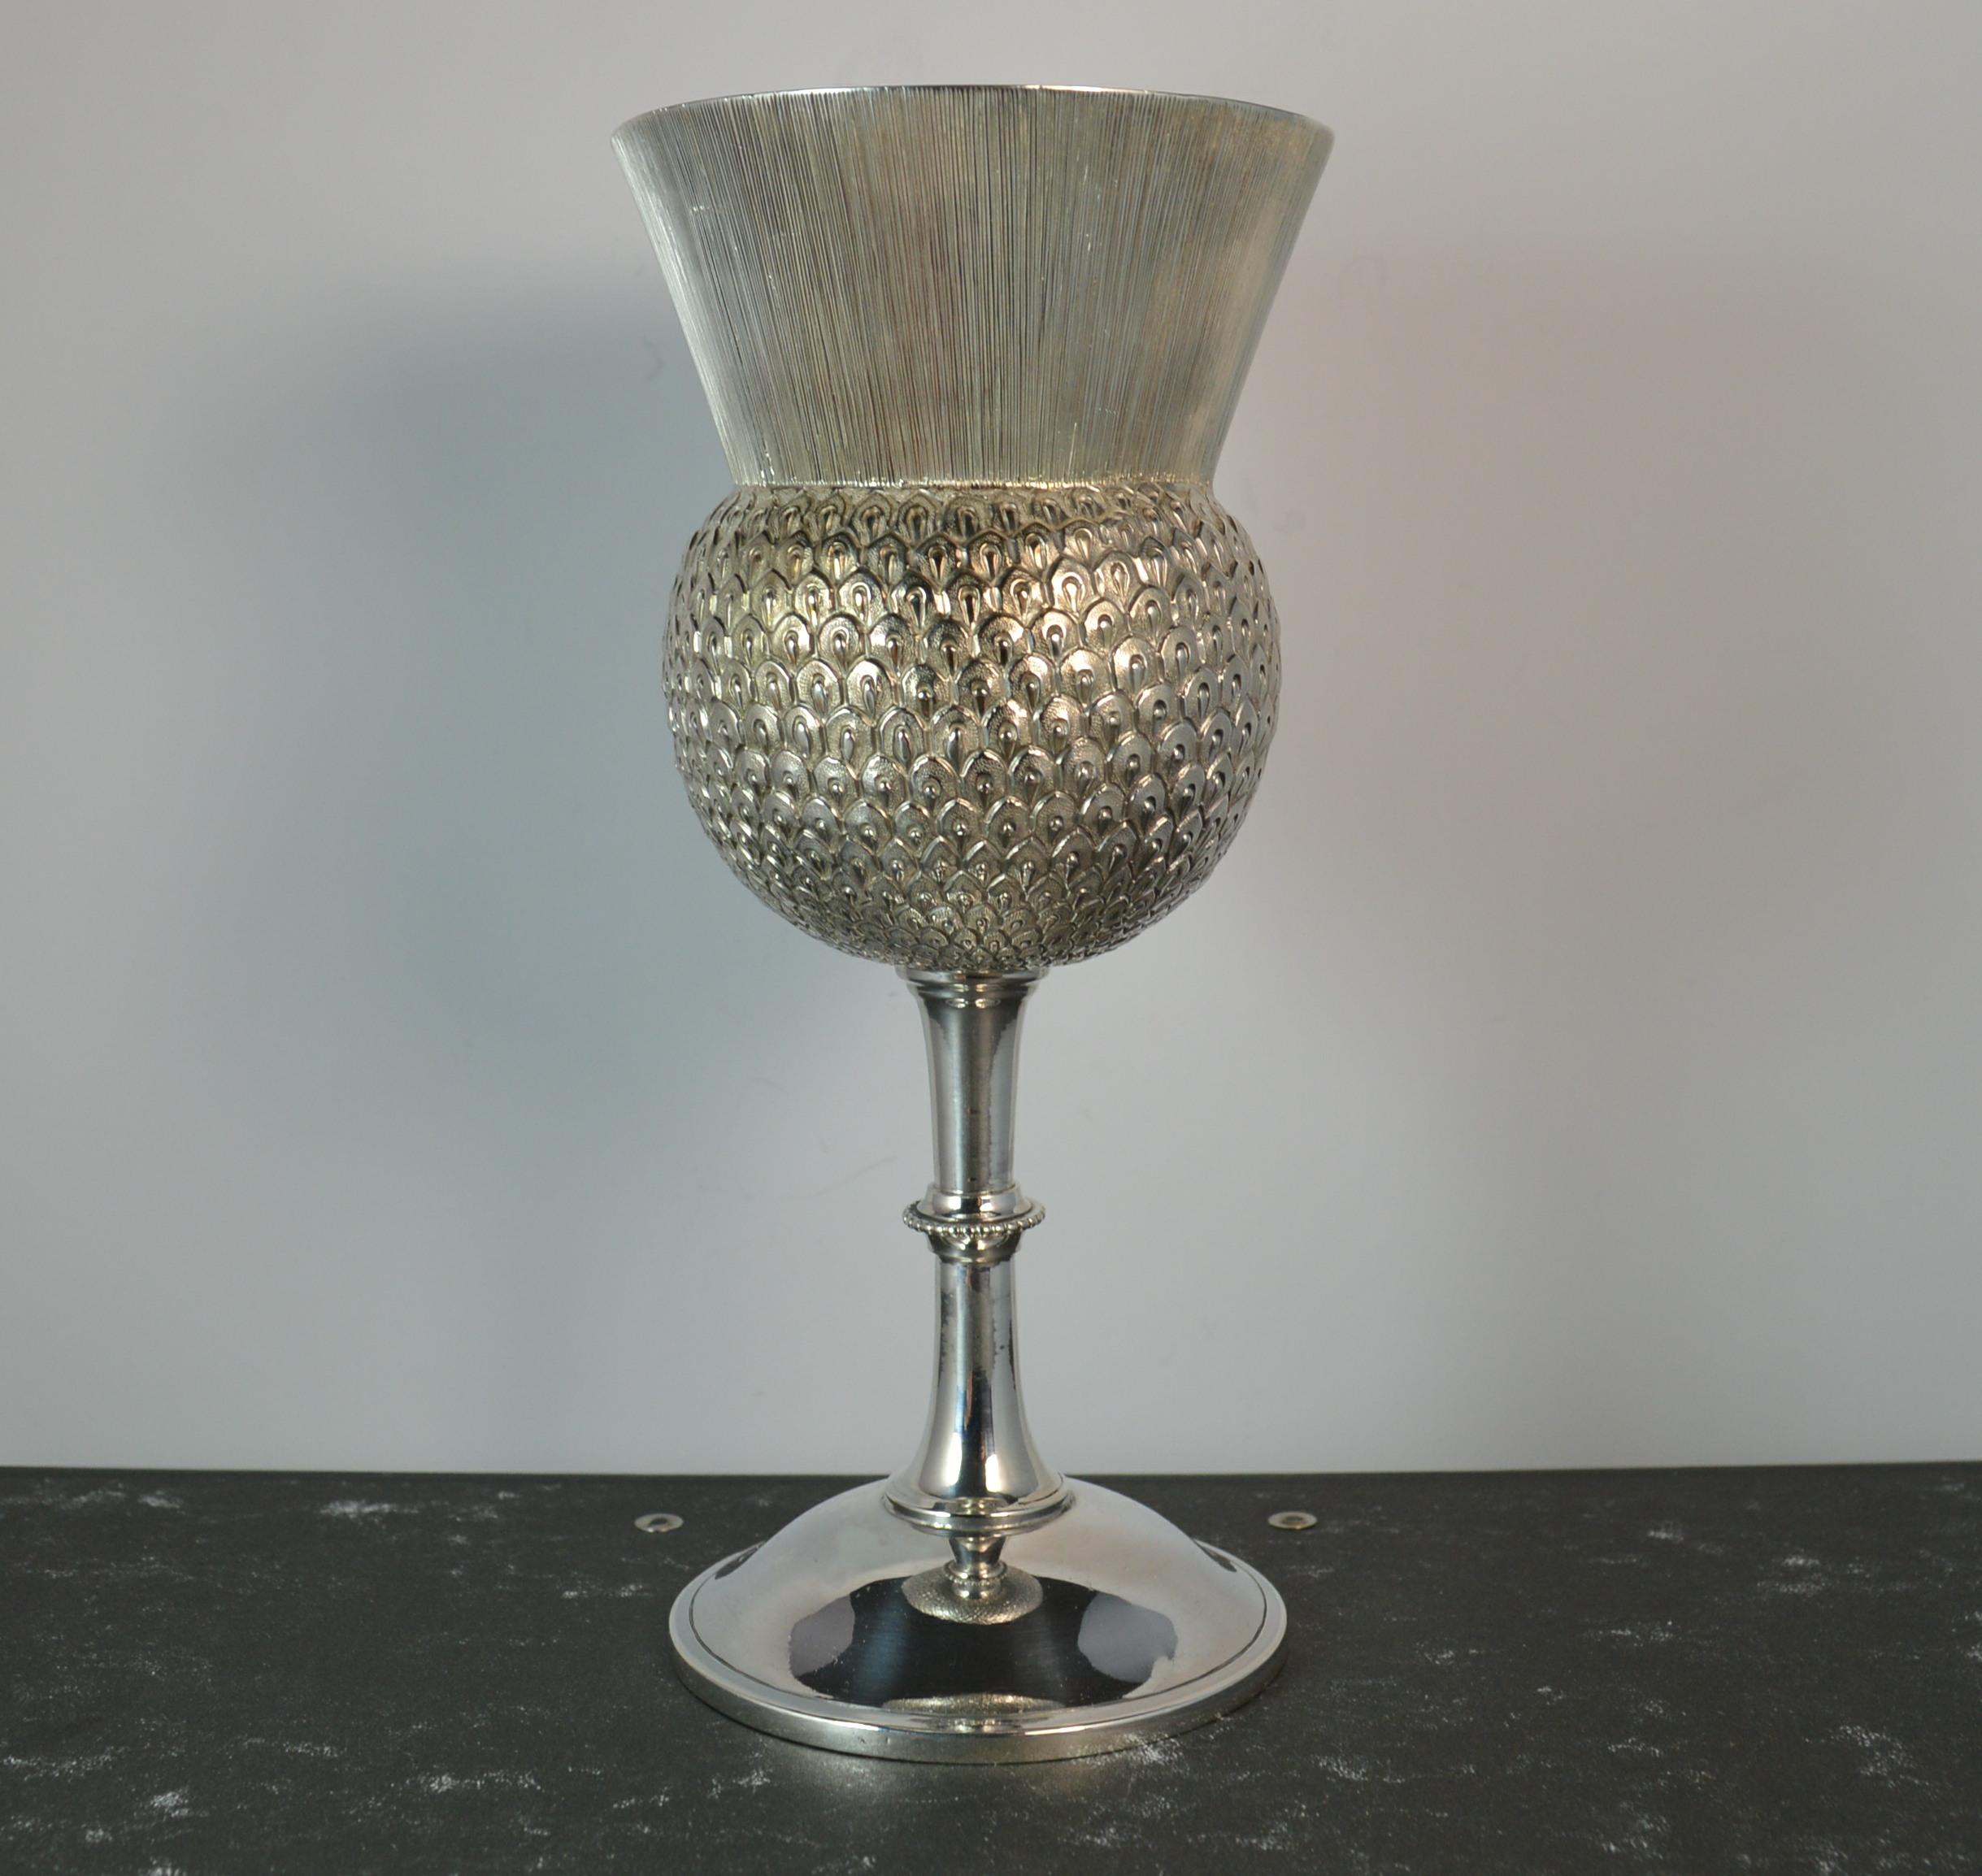 A fine novelty piece of mid Victorian silver.
English made in the form of a thistle. 
Ideal drinking vessel or goblet.

Hallmarks ; lion, Birmingham assay, date letter x and makers initials
Weight ; 170 grams
Size ; 17.4cm tall, 72mm diameter